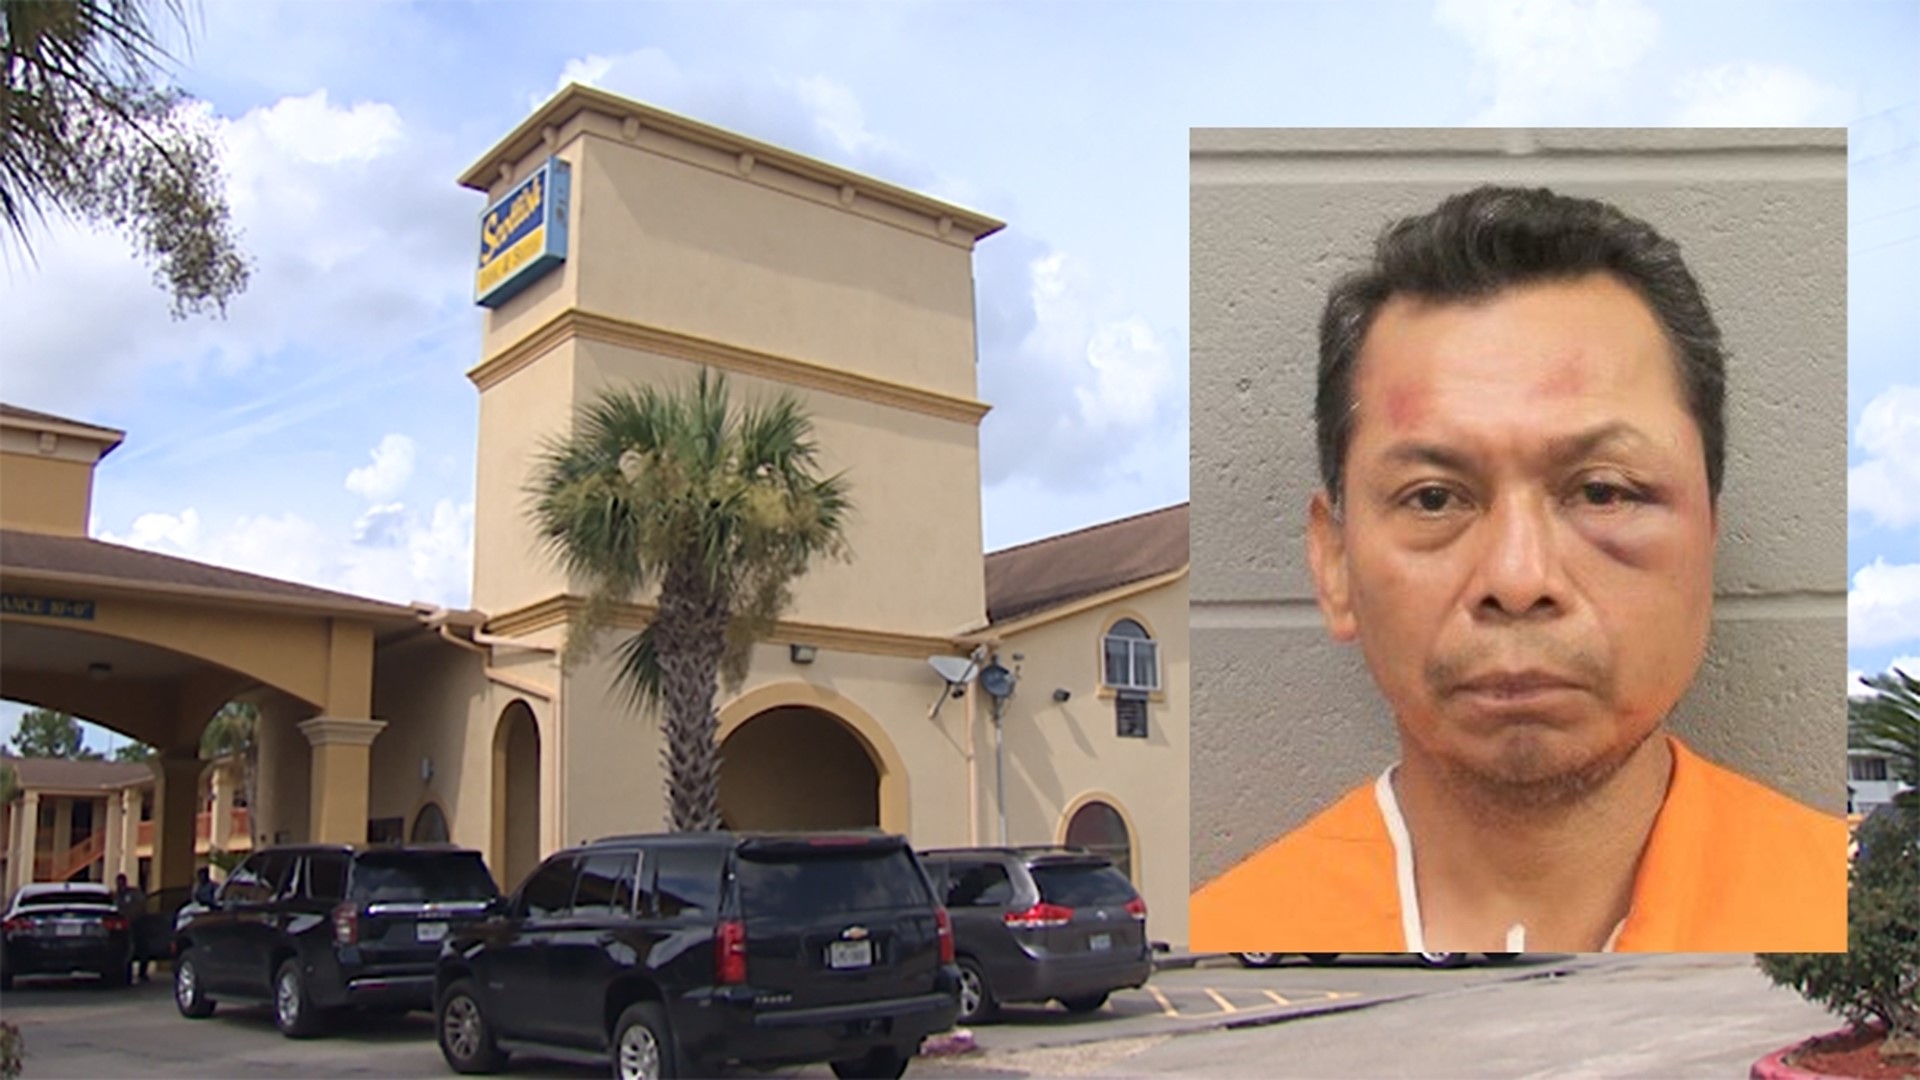 Holman Hernandez, 50, is charged with aggravated kidnapping and a judge set his bond at $1 million.